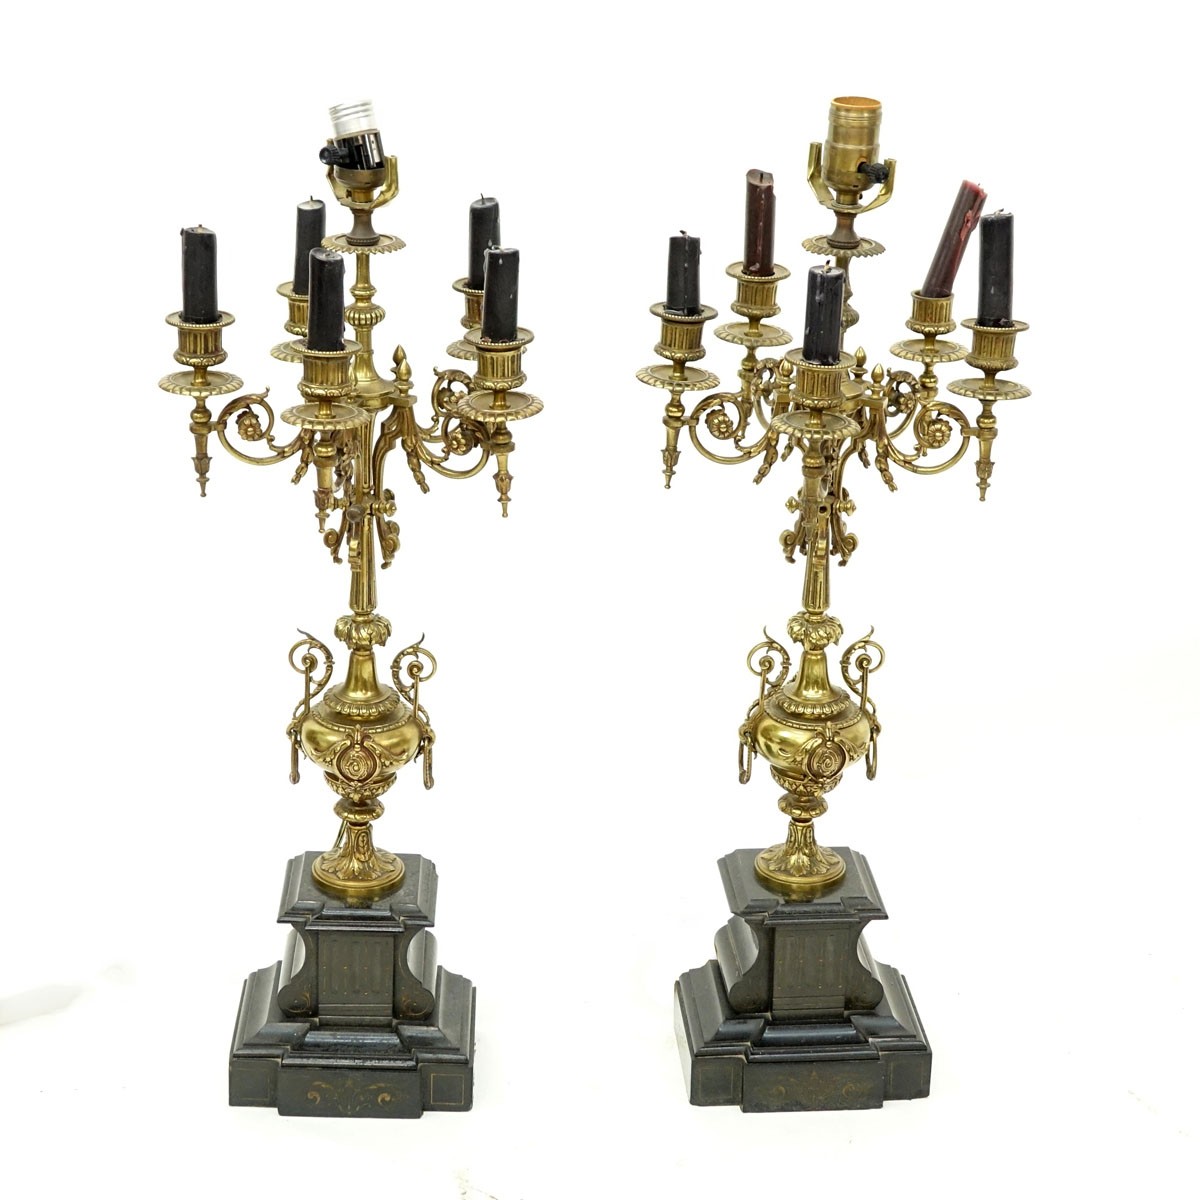 Pair of Gilt Bronze Candelabra Lamps Mounted on Marble Base. Rubbing to gilt, chips and  nicks to marble.